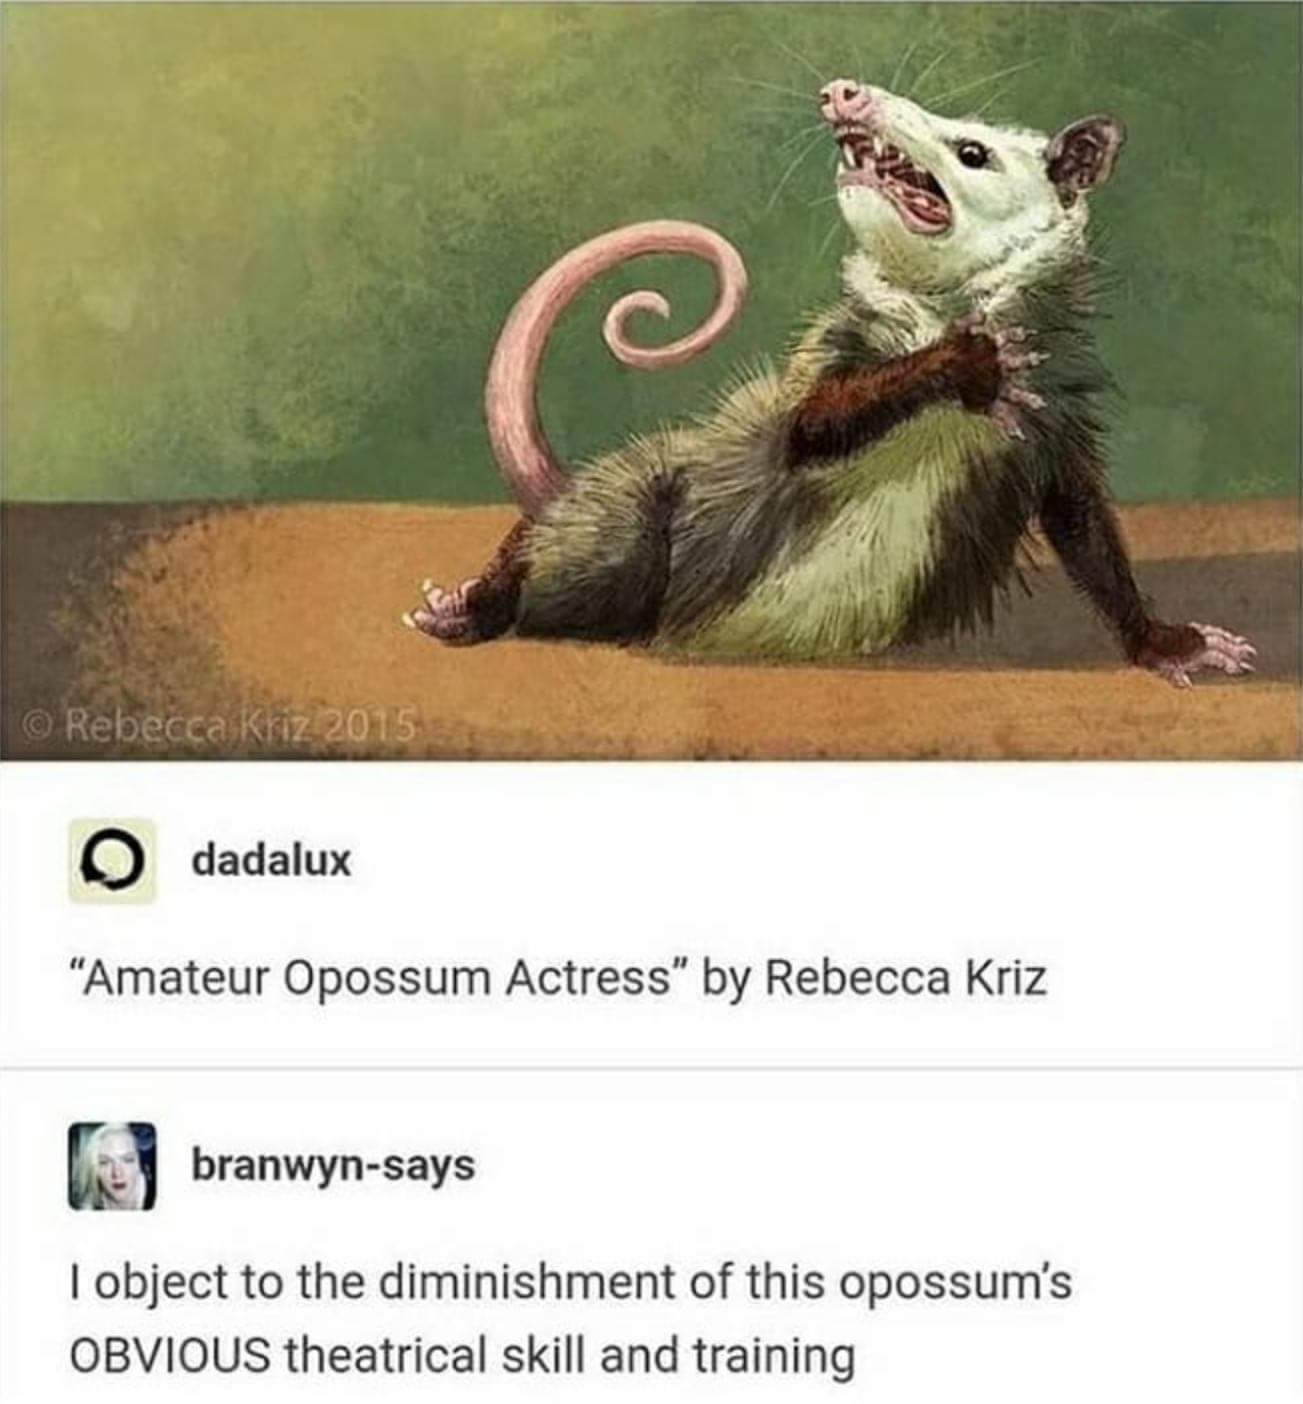 amateur opossum actress by rebecca kriz - Rebecca Kriz 2015 dadalux "Amateur Opossum Actress" by Rebecca Kriz branwynsays I object to the diminishment of this opossum's Obvious theatrical skill and training